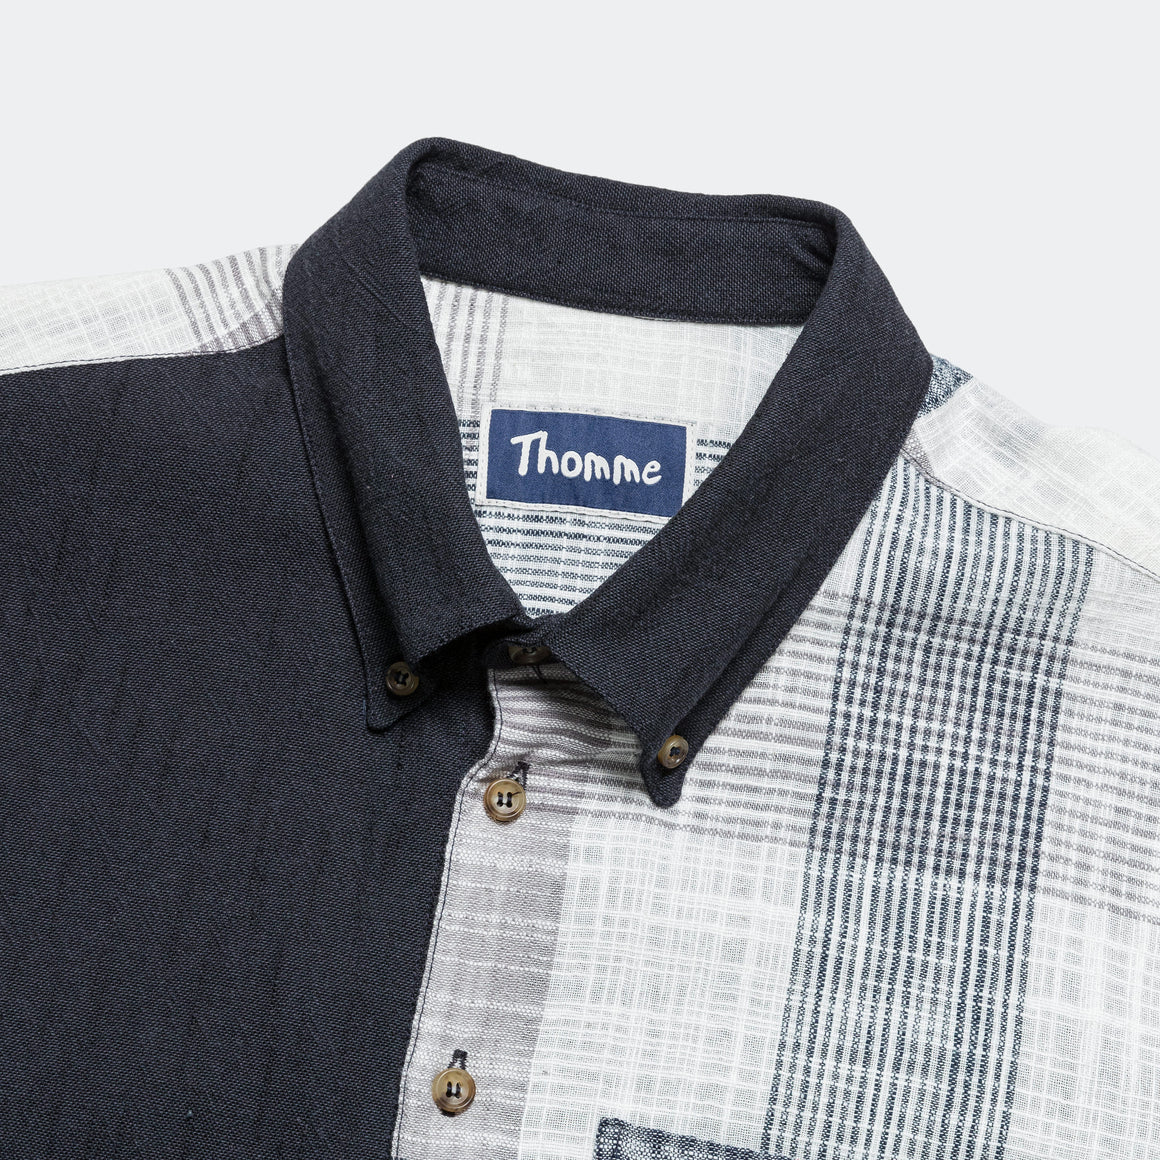 Thomme - Relaxed Shirt - Navy/White - UP THERE